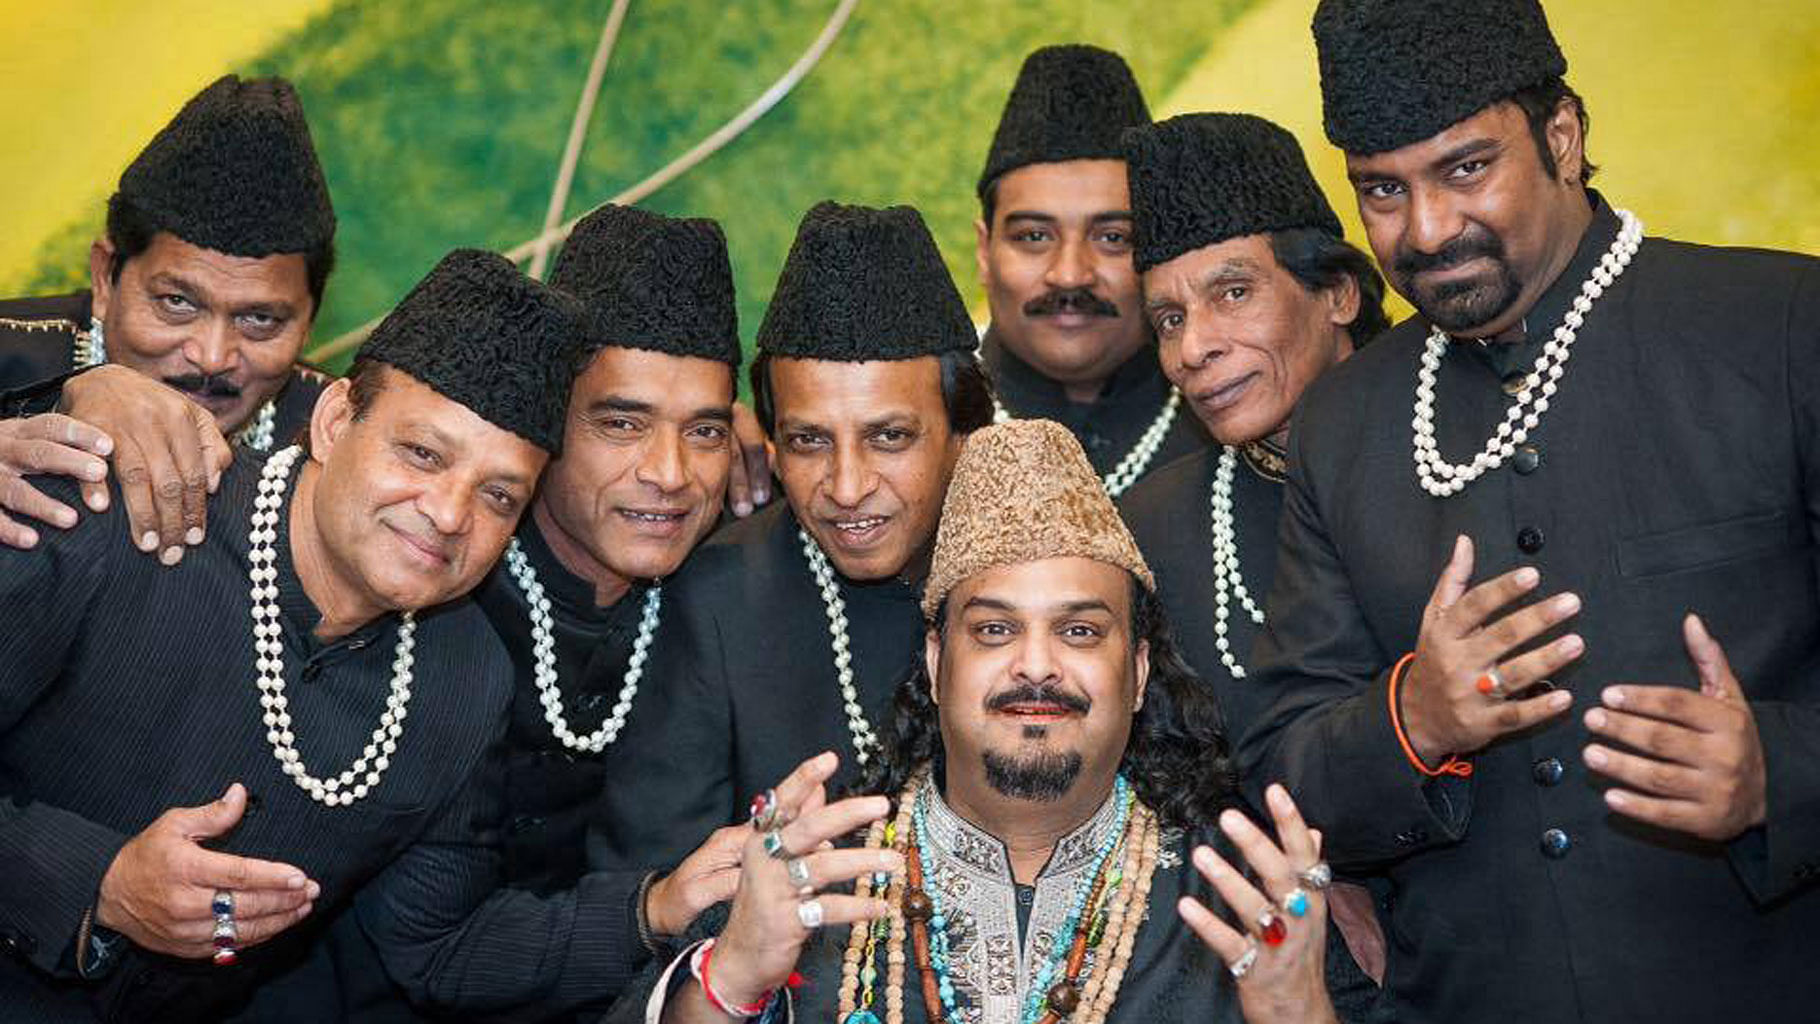 Amjad Sabri was shot dead outside his residence in Karachi. (Photo Courtesy: <a href="http://https://www.facebook.com/photo.php?fbid=777460972387158&amp;set=a.558065850993339.1073741829.100003697874079&amp;type=3&amp;theater">Facebook/Amjad Sabri)</a>